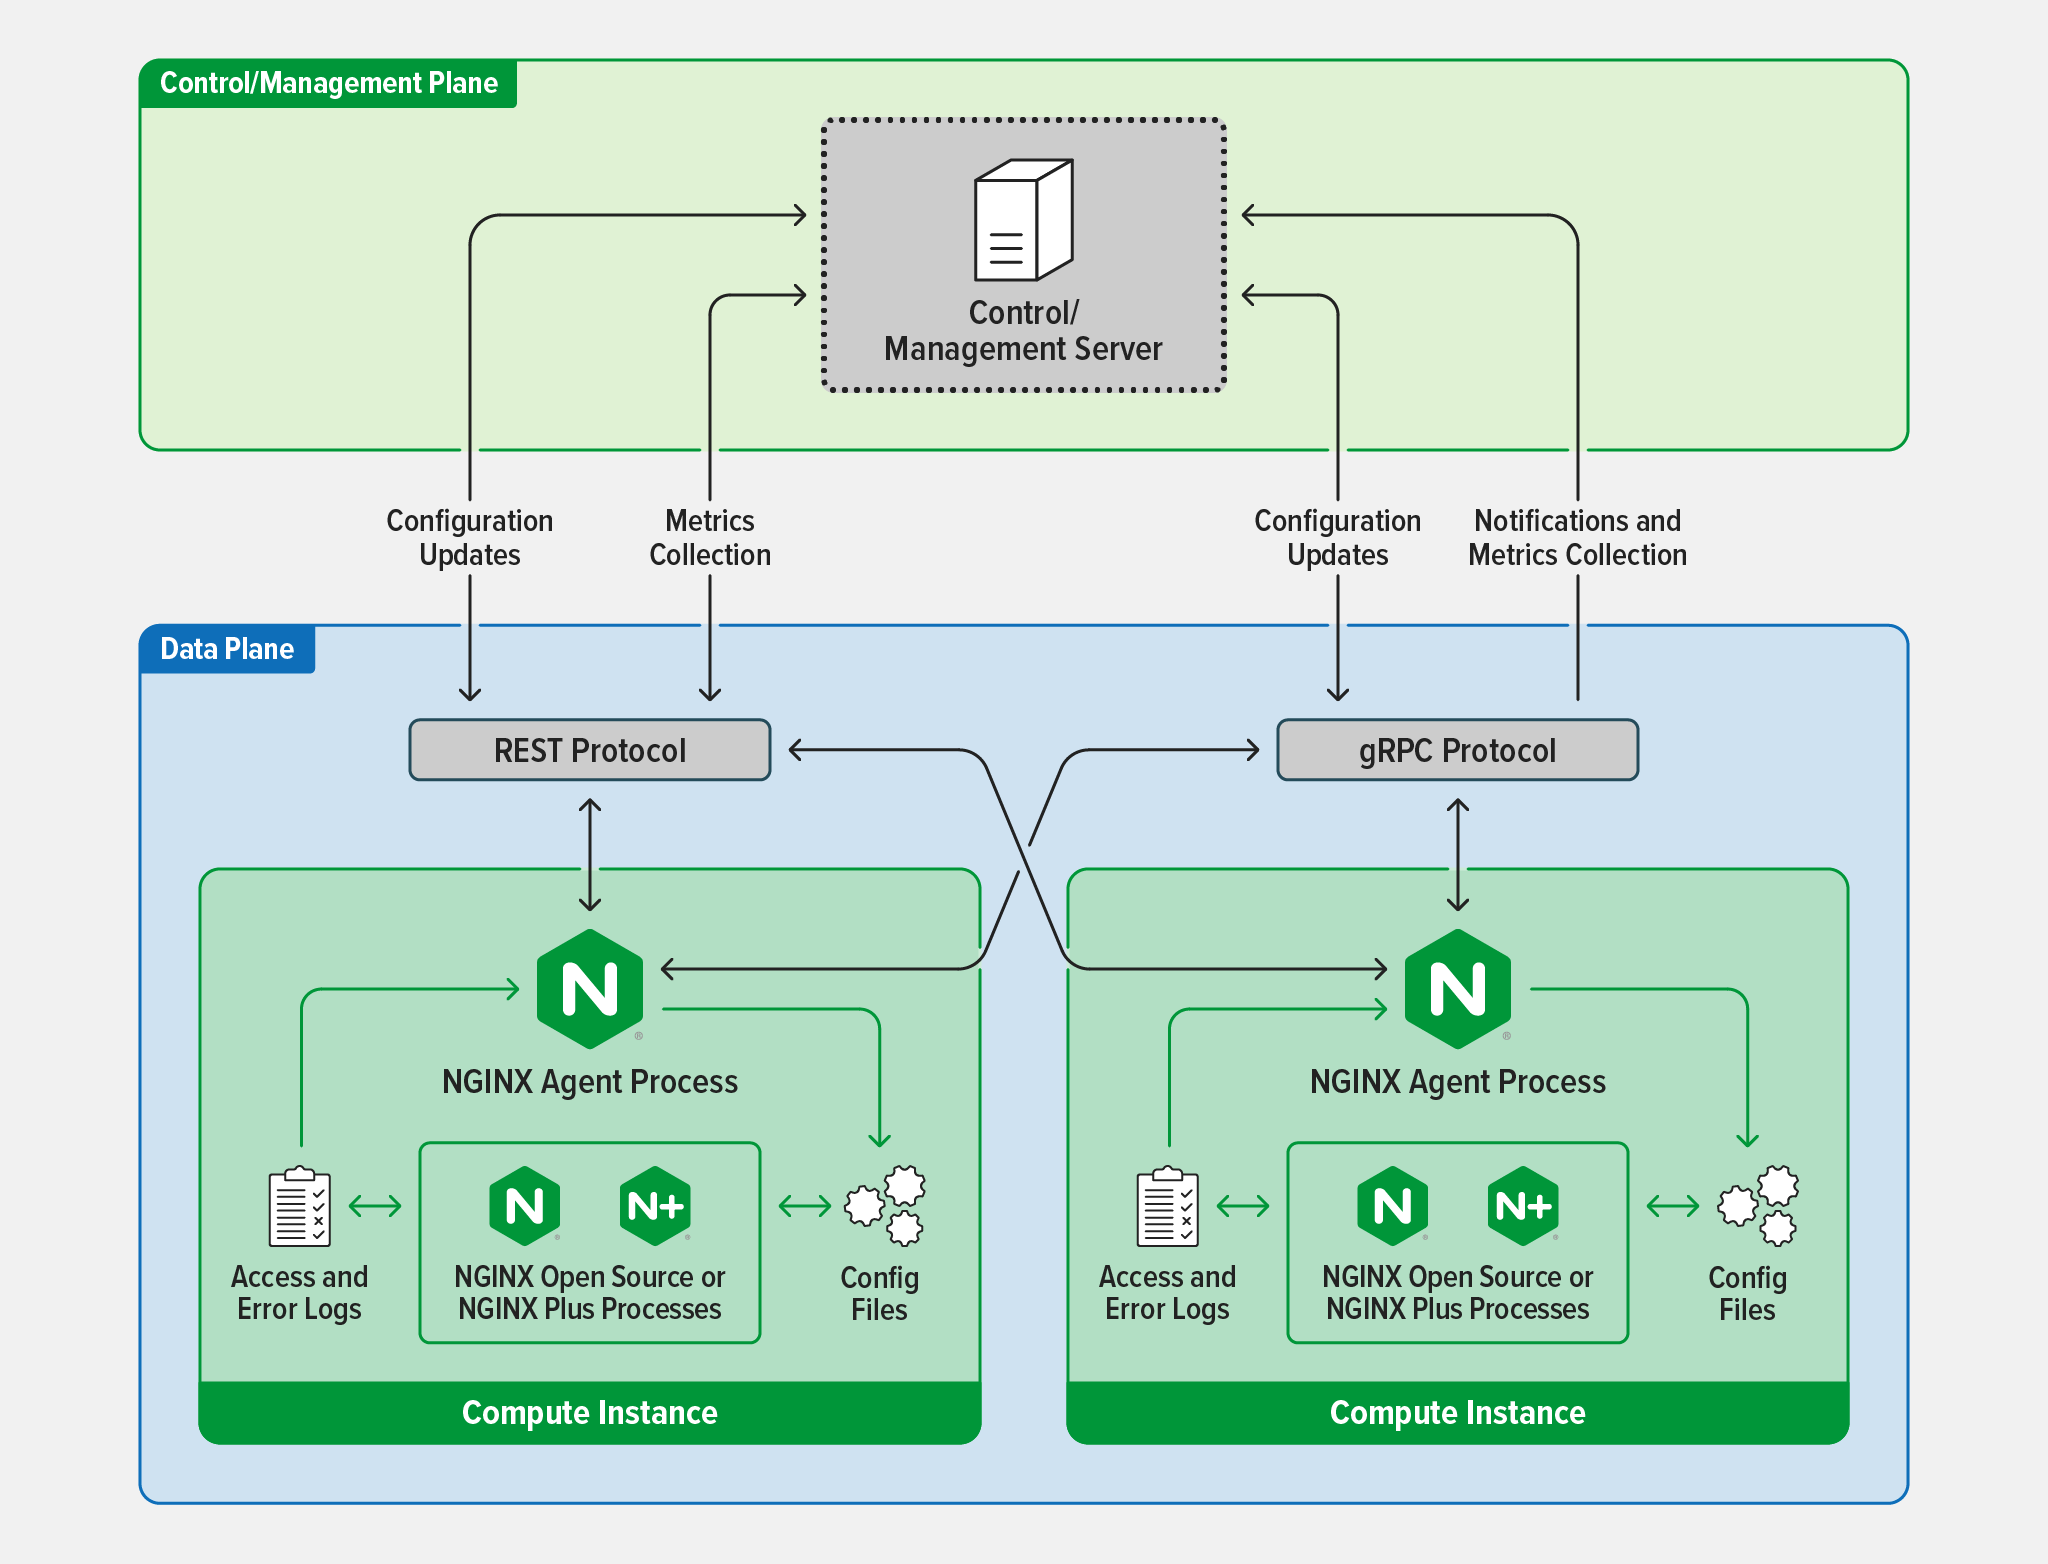 How NGINX Agent works